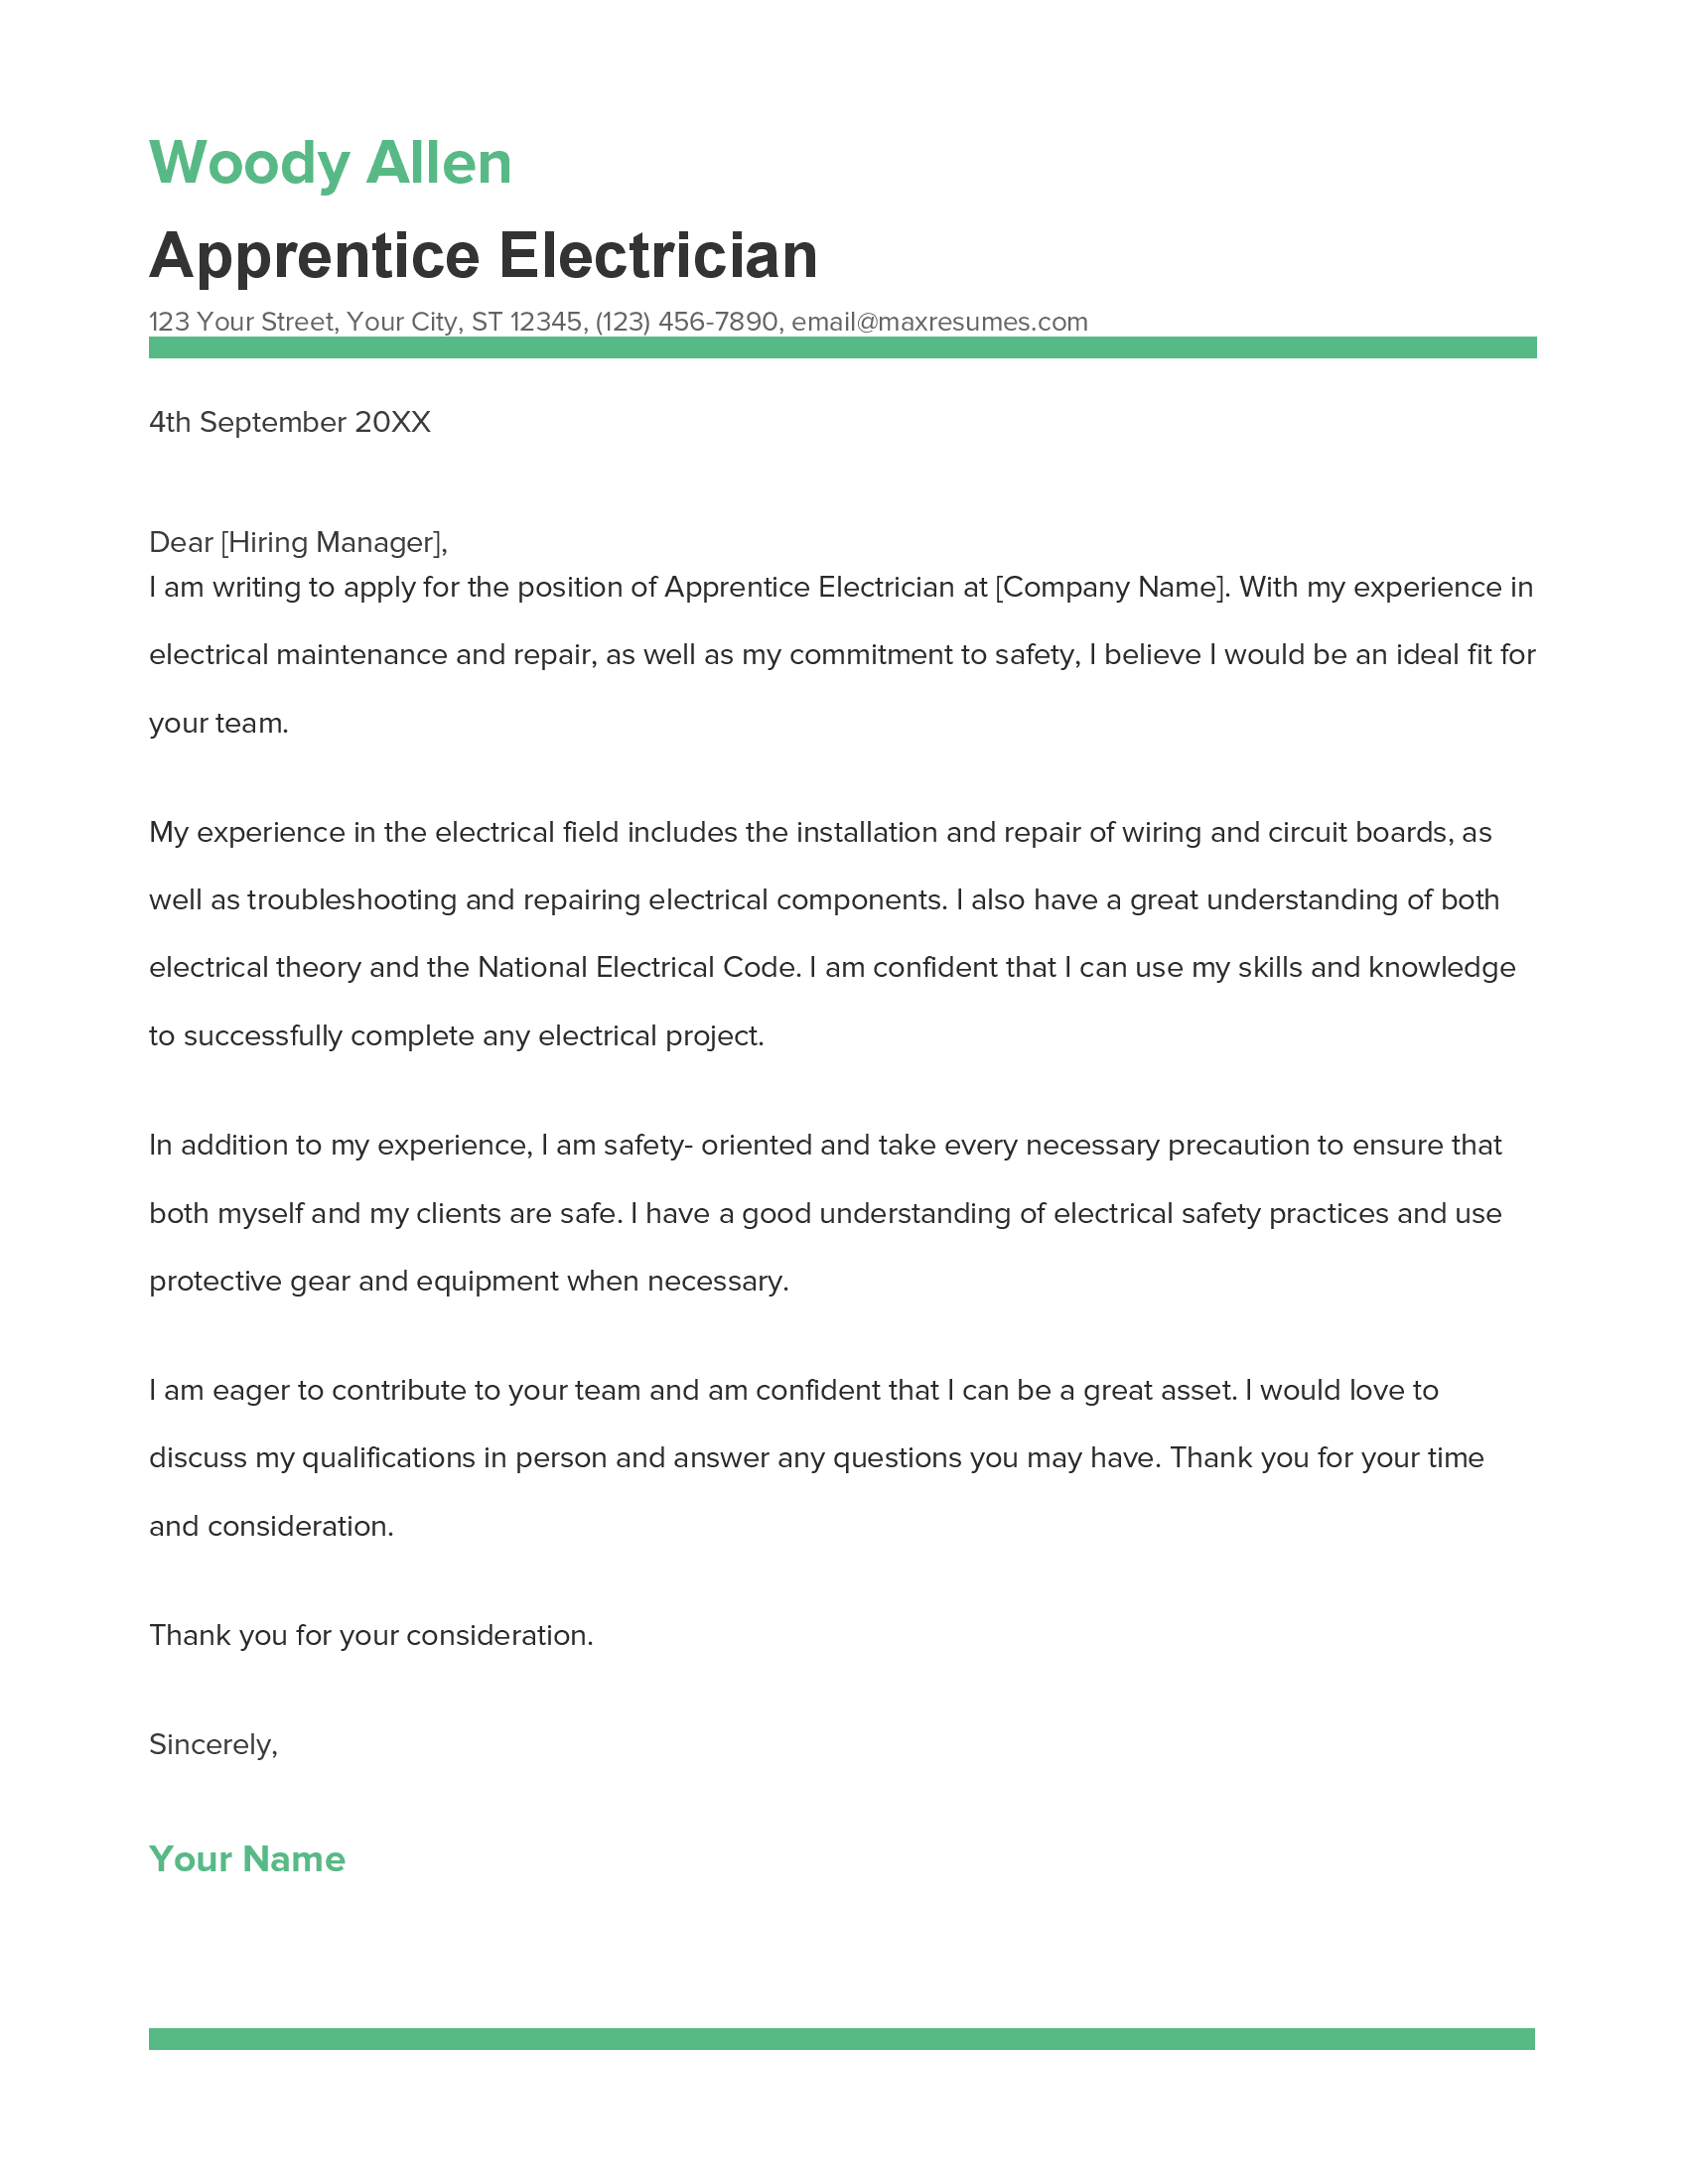 cover letter for an apprentice electrician